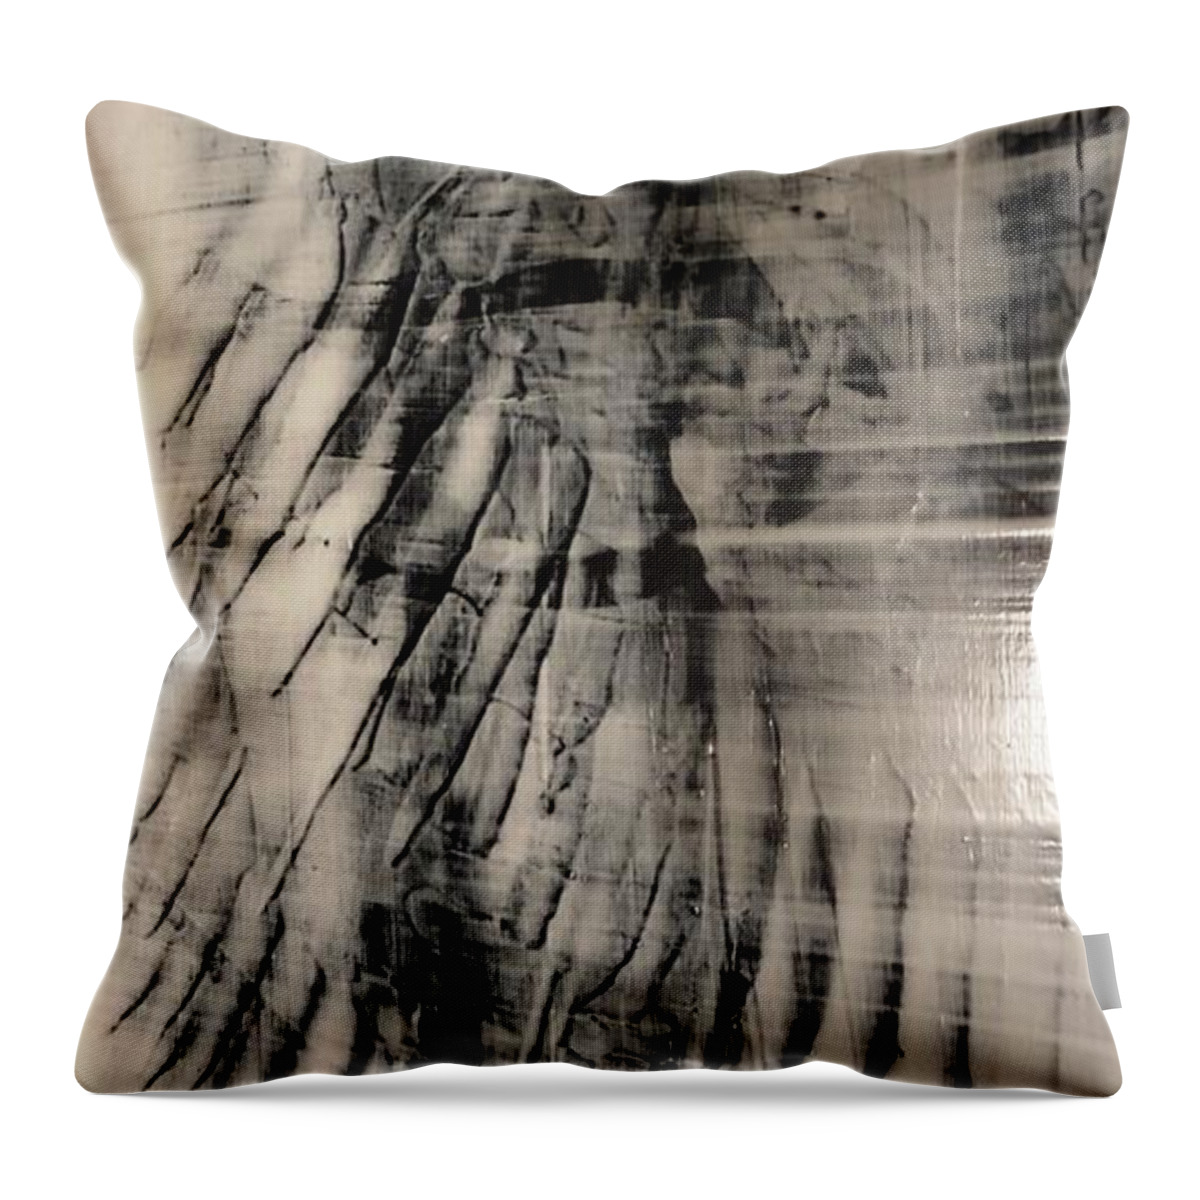 Zebra Throw Pillow featuring the painting Wws II by Tia McDermid